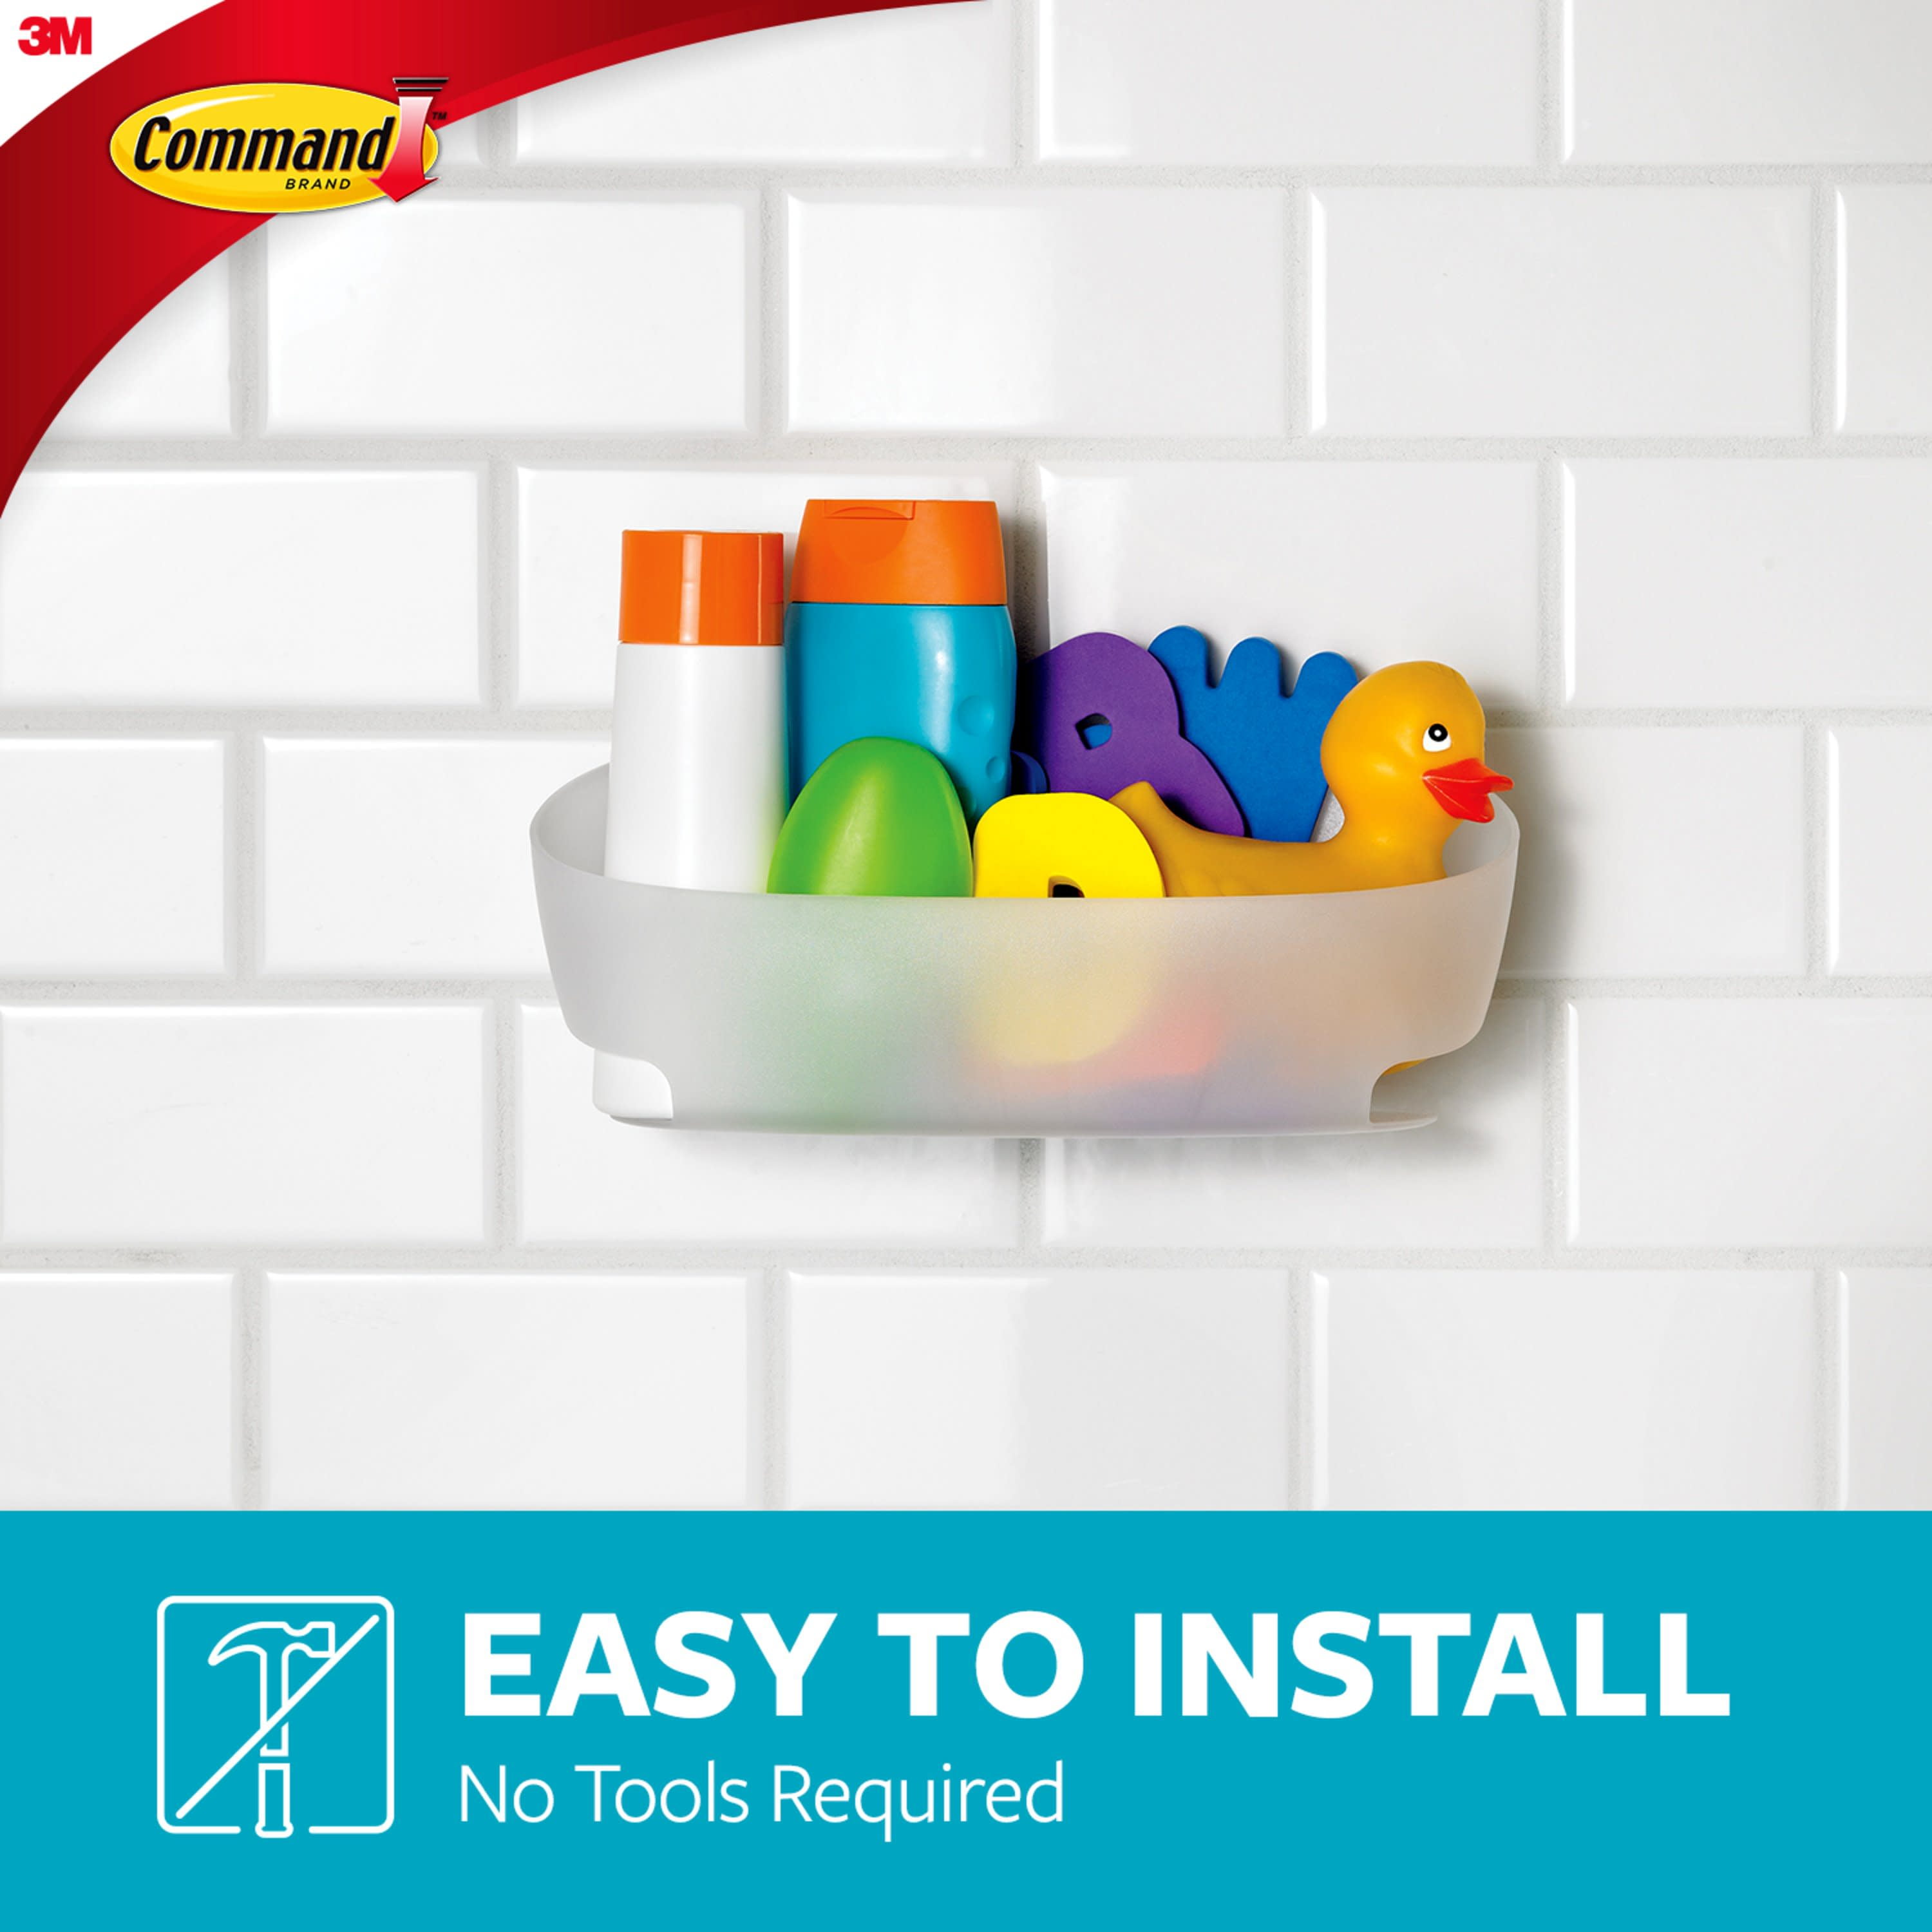 3M Command™ BATH11-ES Shower Caddy with Water-Resistant Strips, Furniture  & Home Décor